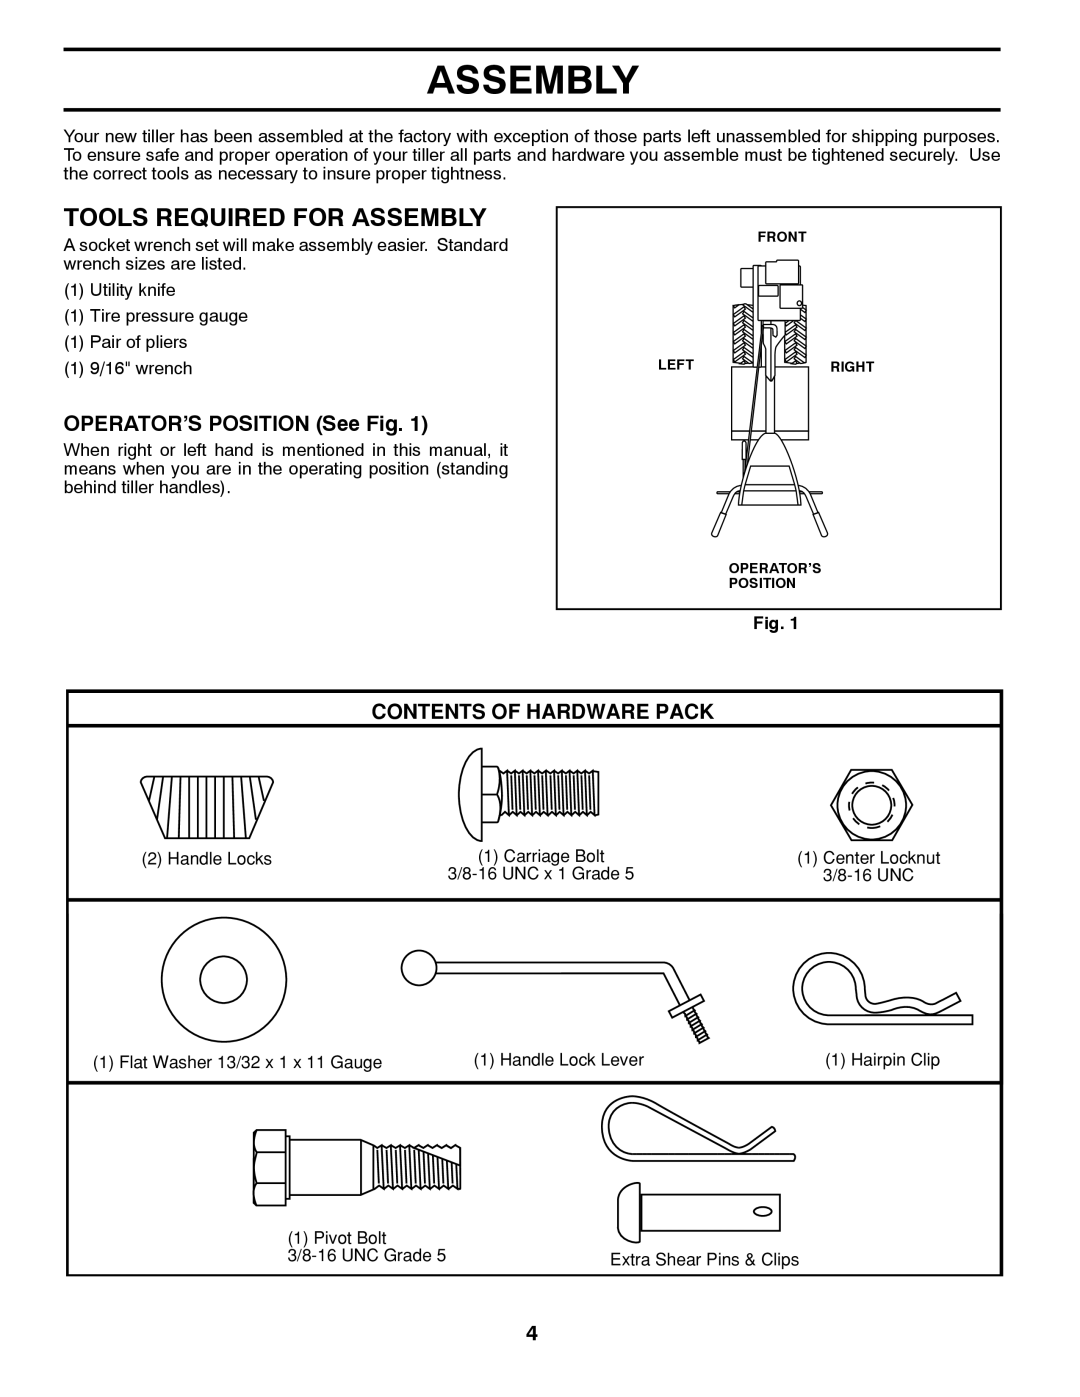 Husqvarna RTT900 owner manual Tools Required For Assembly, OPERATOR’S POSITION See Fig, Contents Of Hardware Pack 